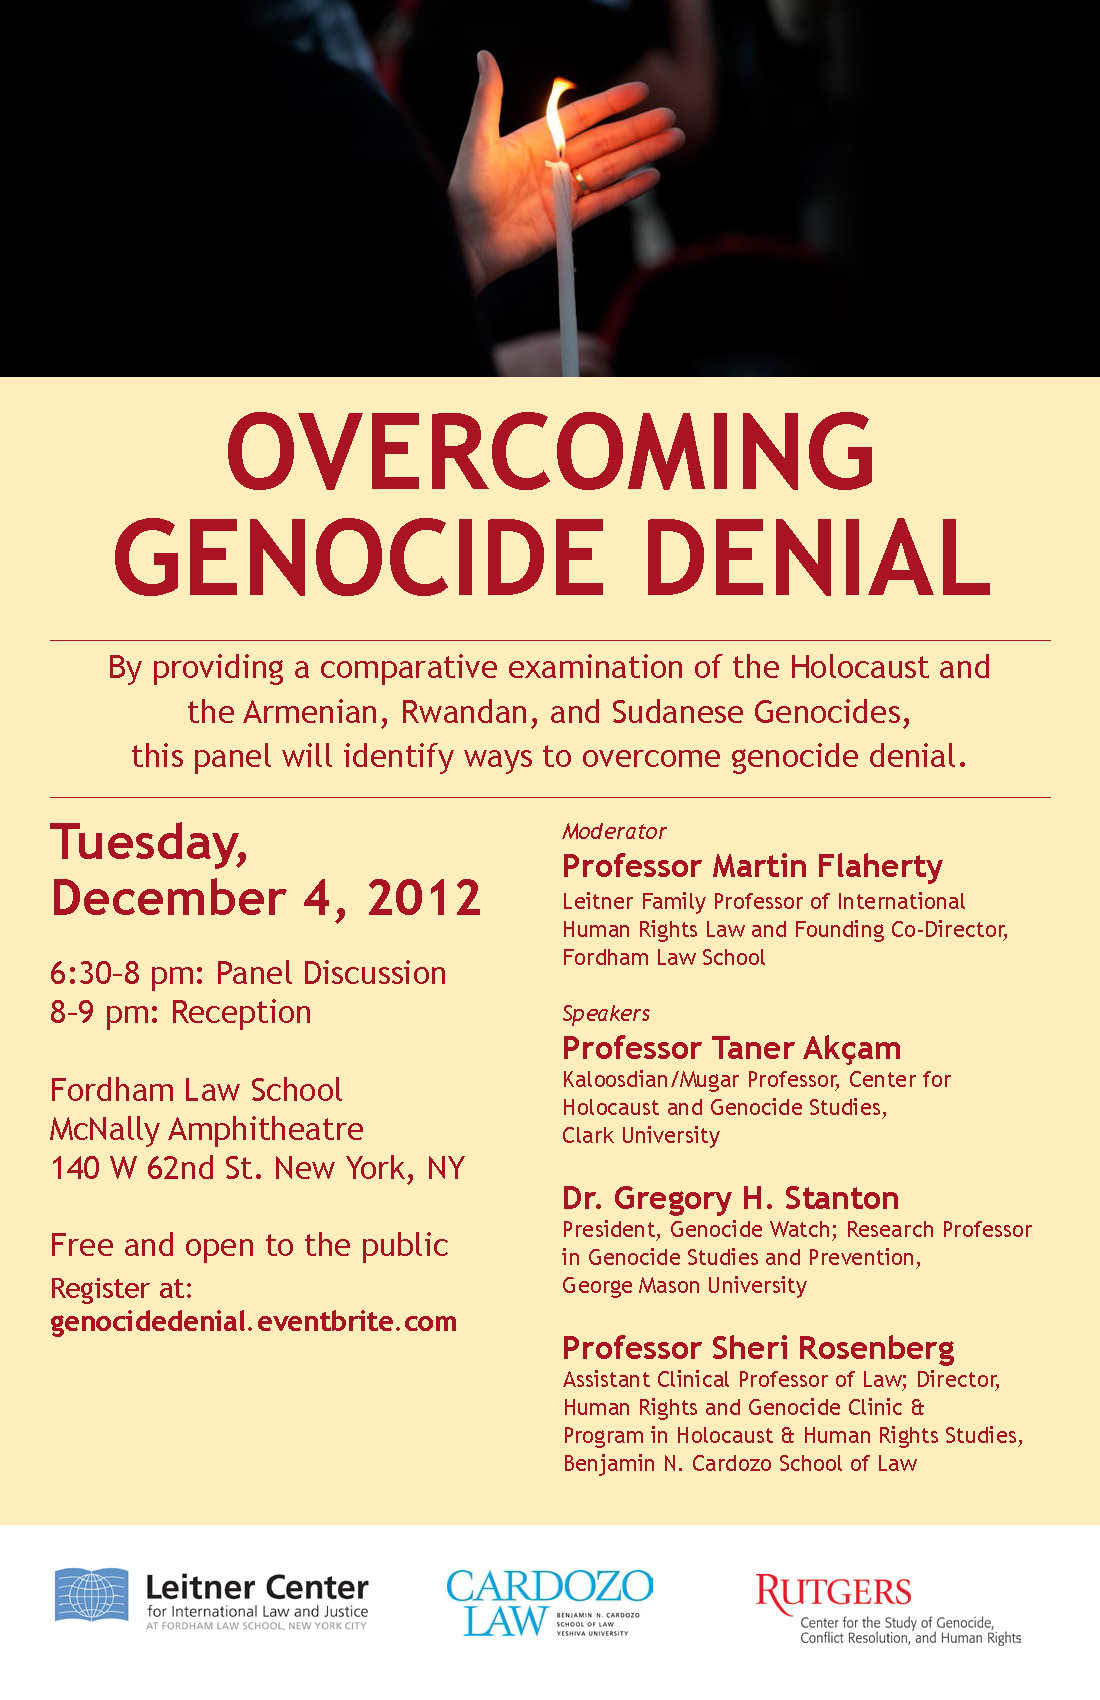 Event poster_Overcoming Genocide Denial_Dec 4 at 6:30 pm, Fordham Law School